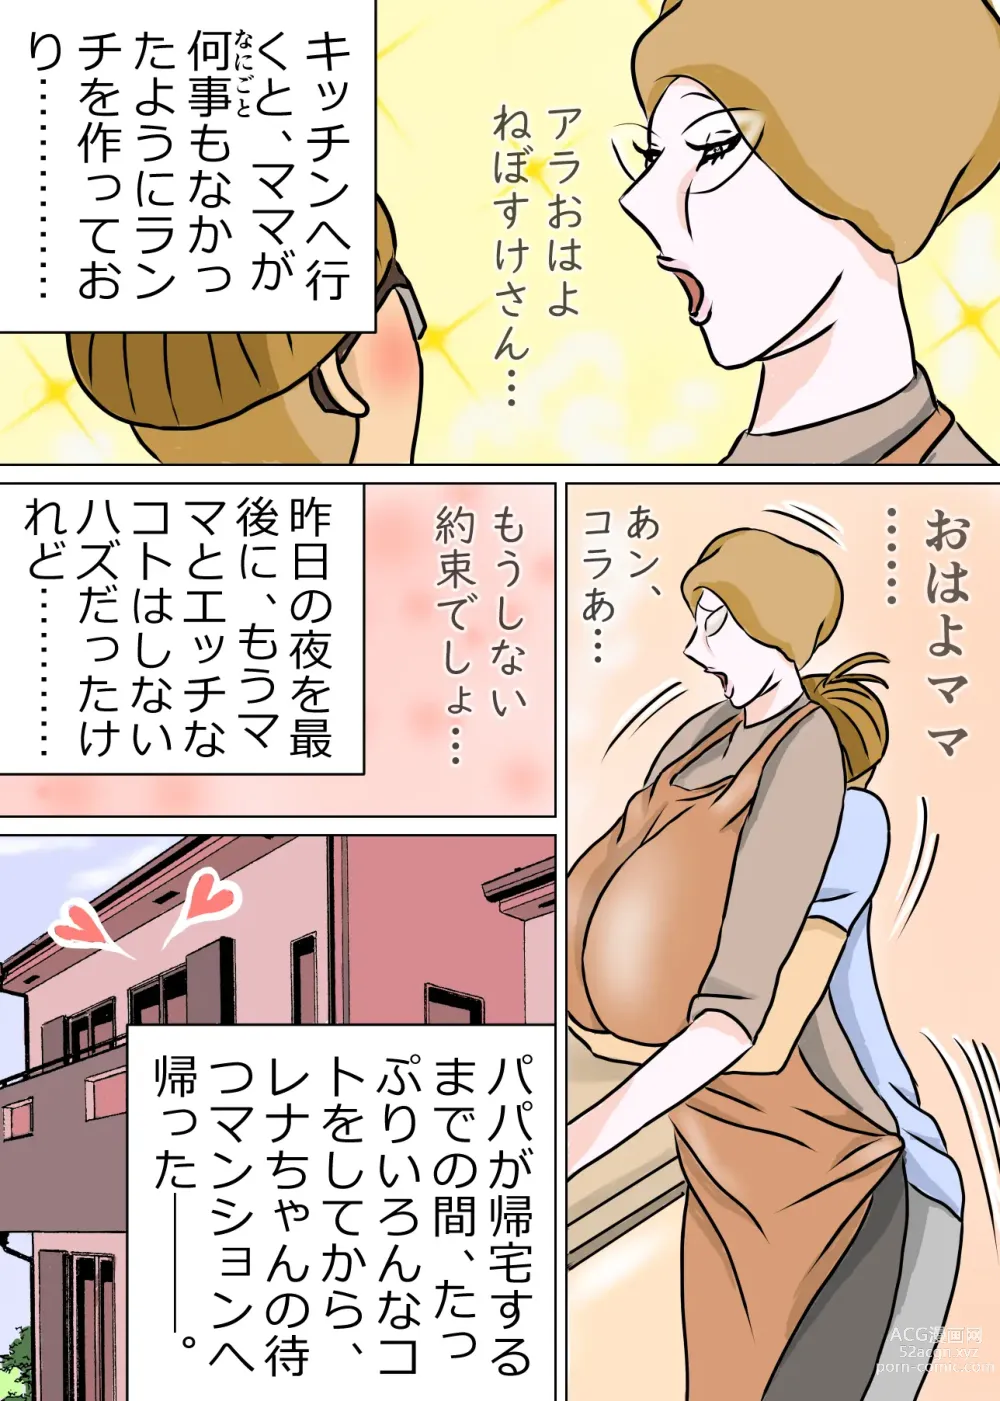 Page 73 of doujinshi 教育ママンとボク3